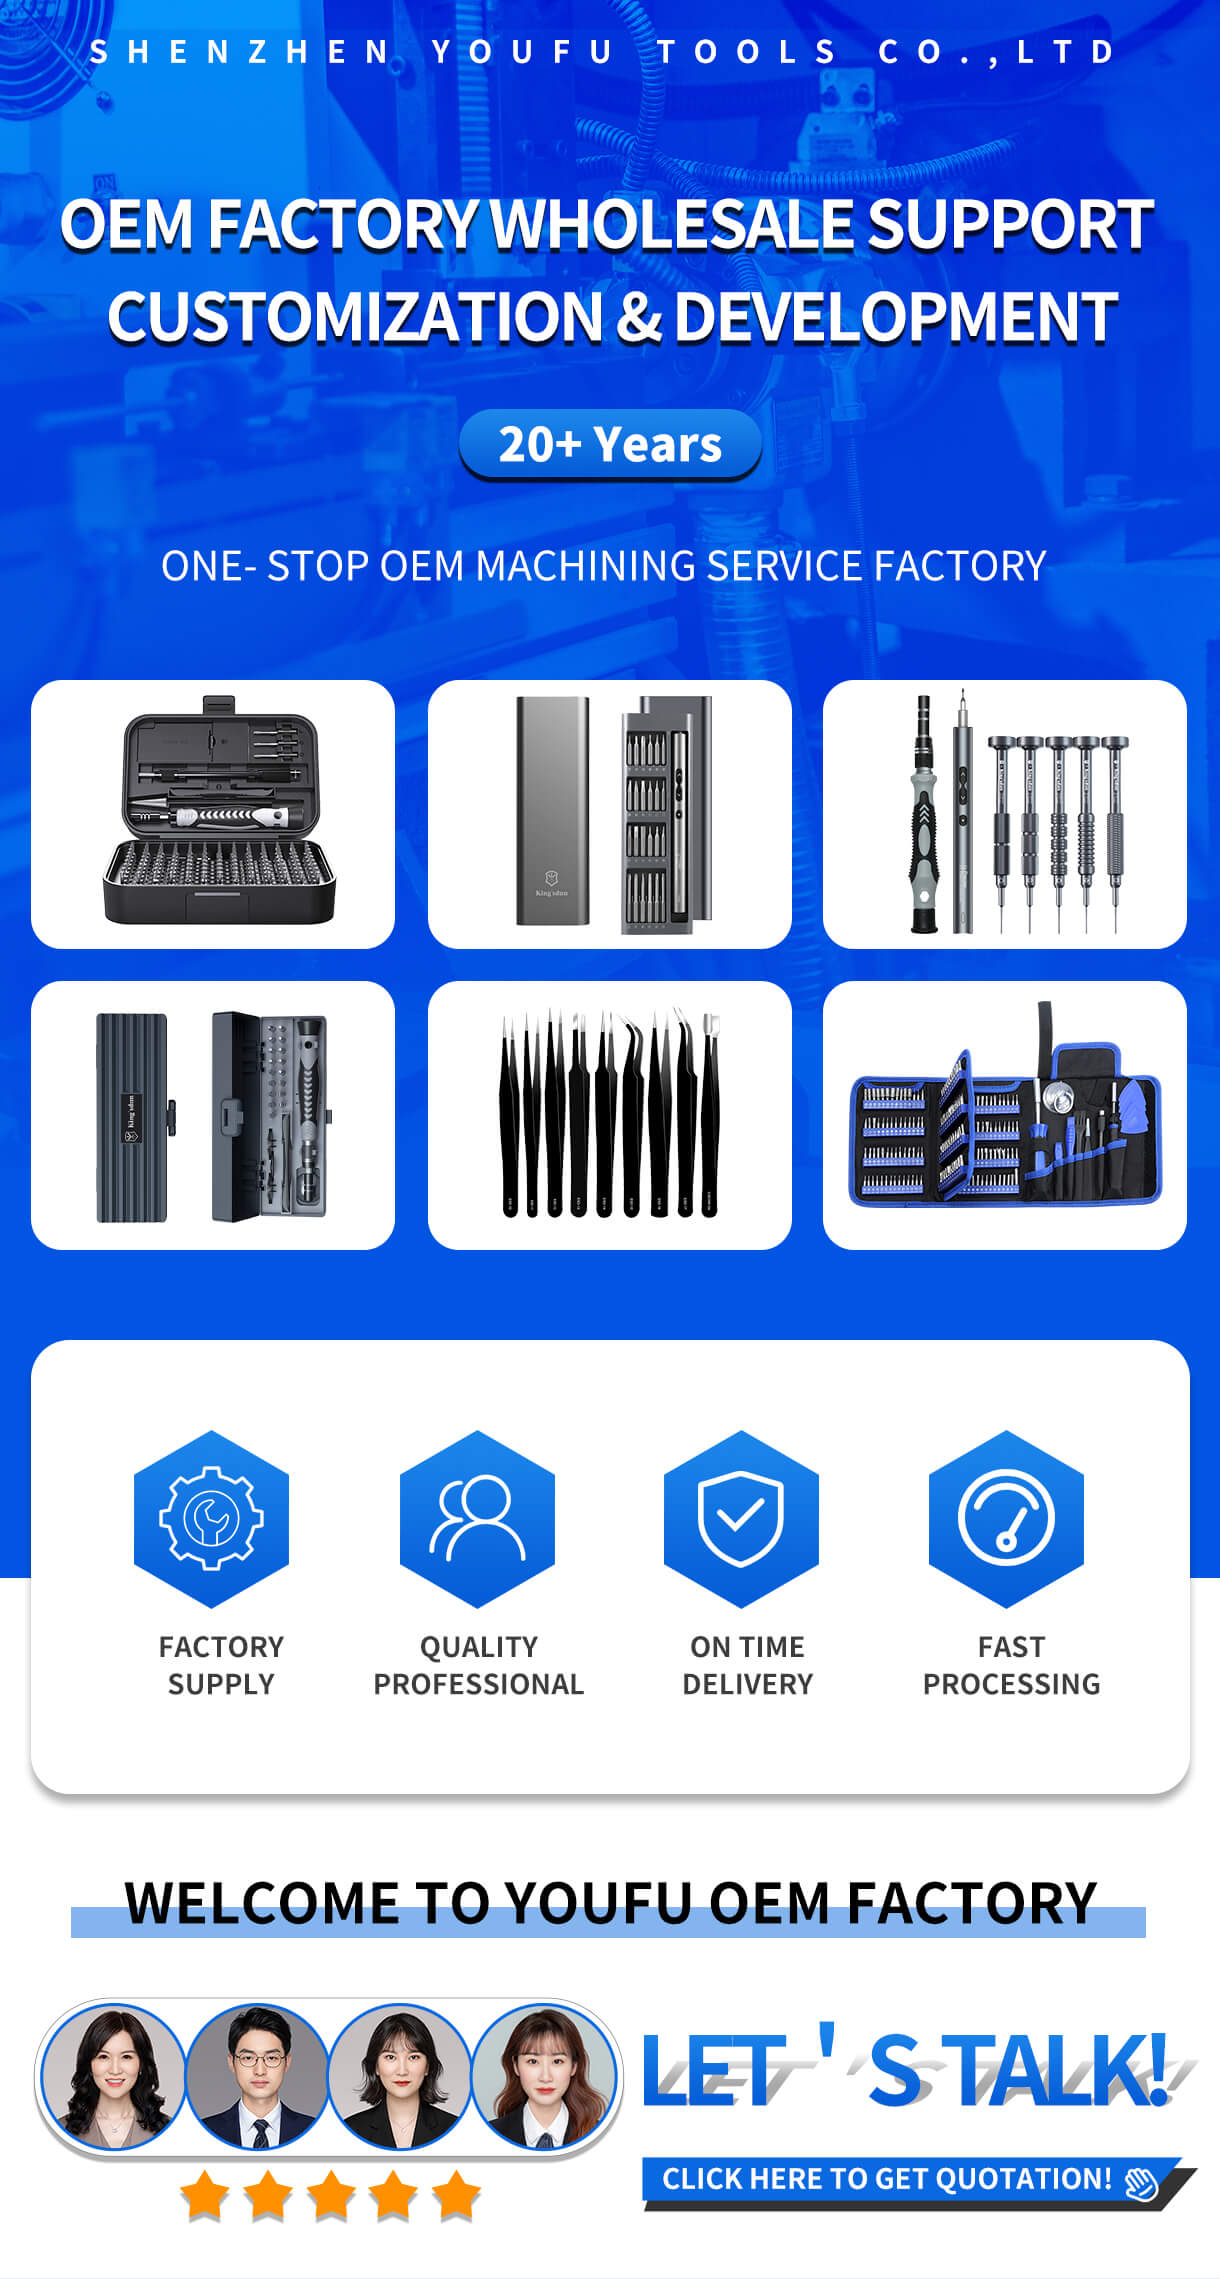 【Ratcheting Mechanism】Ratcheting screwdriver breaks through the limitations of the direction, convenient switch for clockwise(fastening) and counter clockwise(loosening) ratcheting and locking position(as standard multi-bit screwdriver), saves time and effort, enables easier all-day driving【Tool